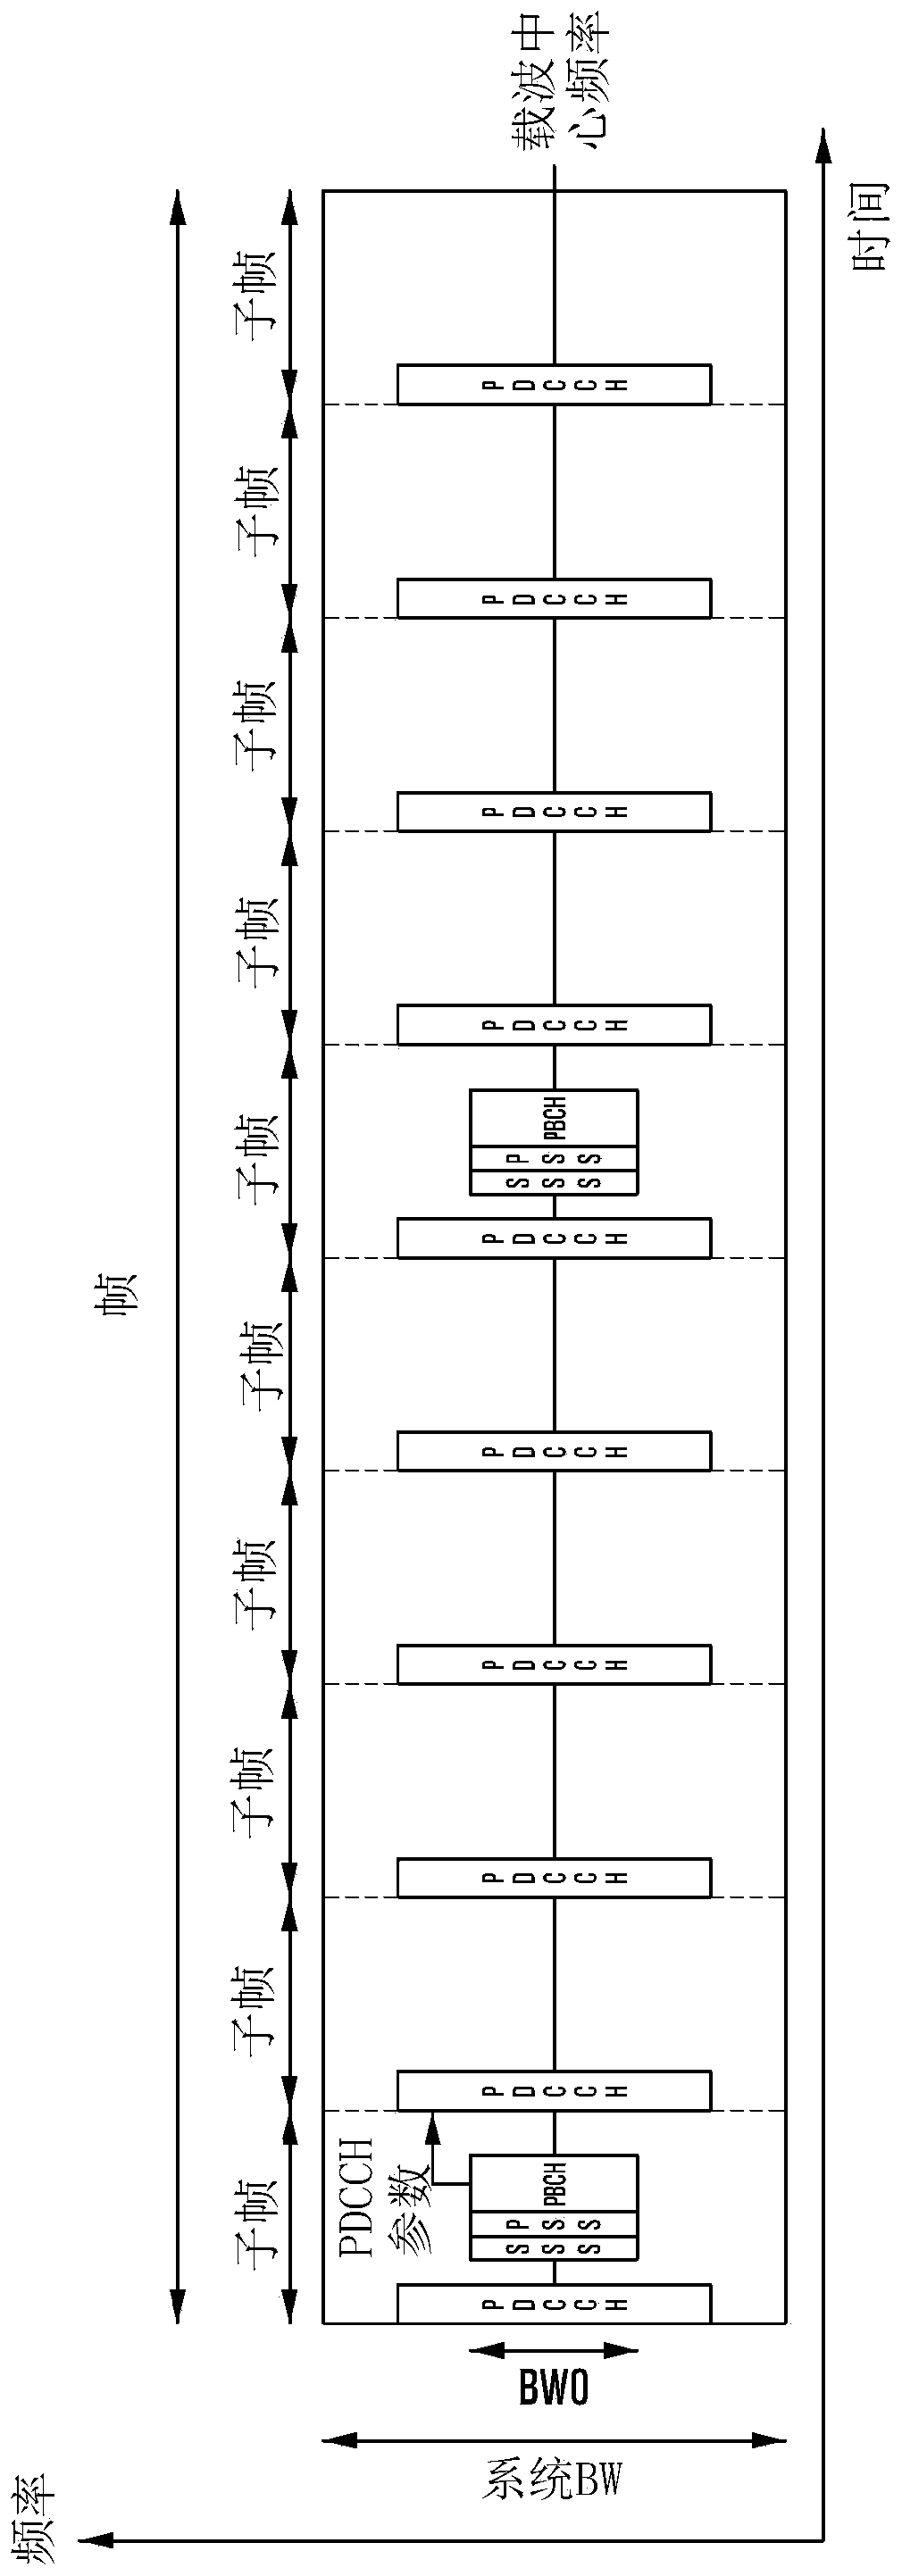 Method and apparatus of flexible data transmissions and receptions in next generation cellular networks